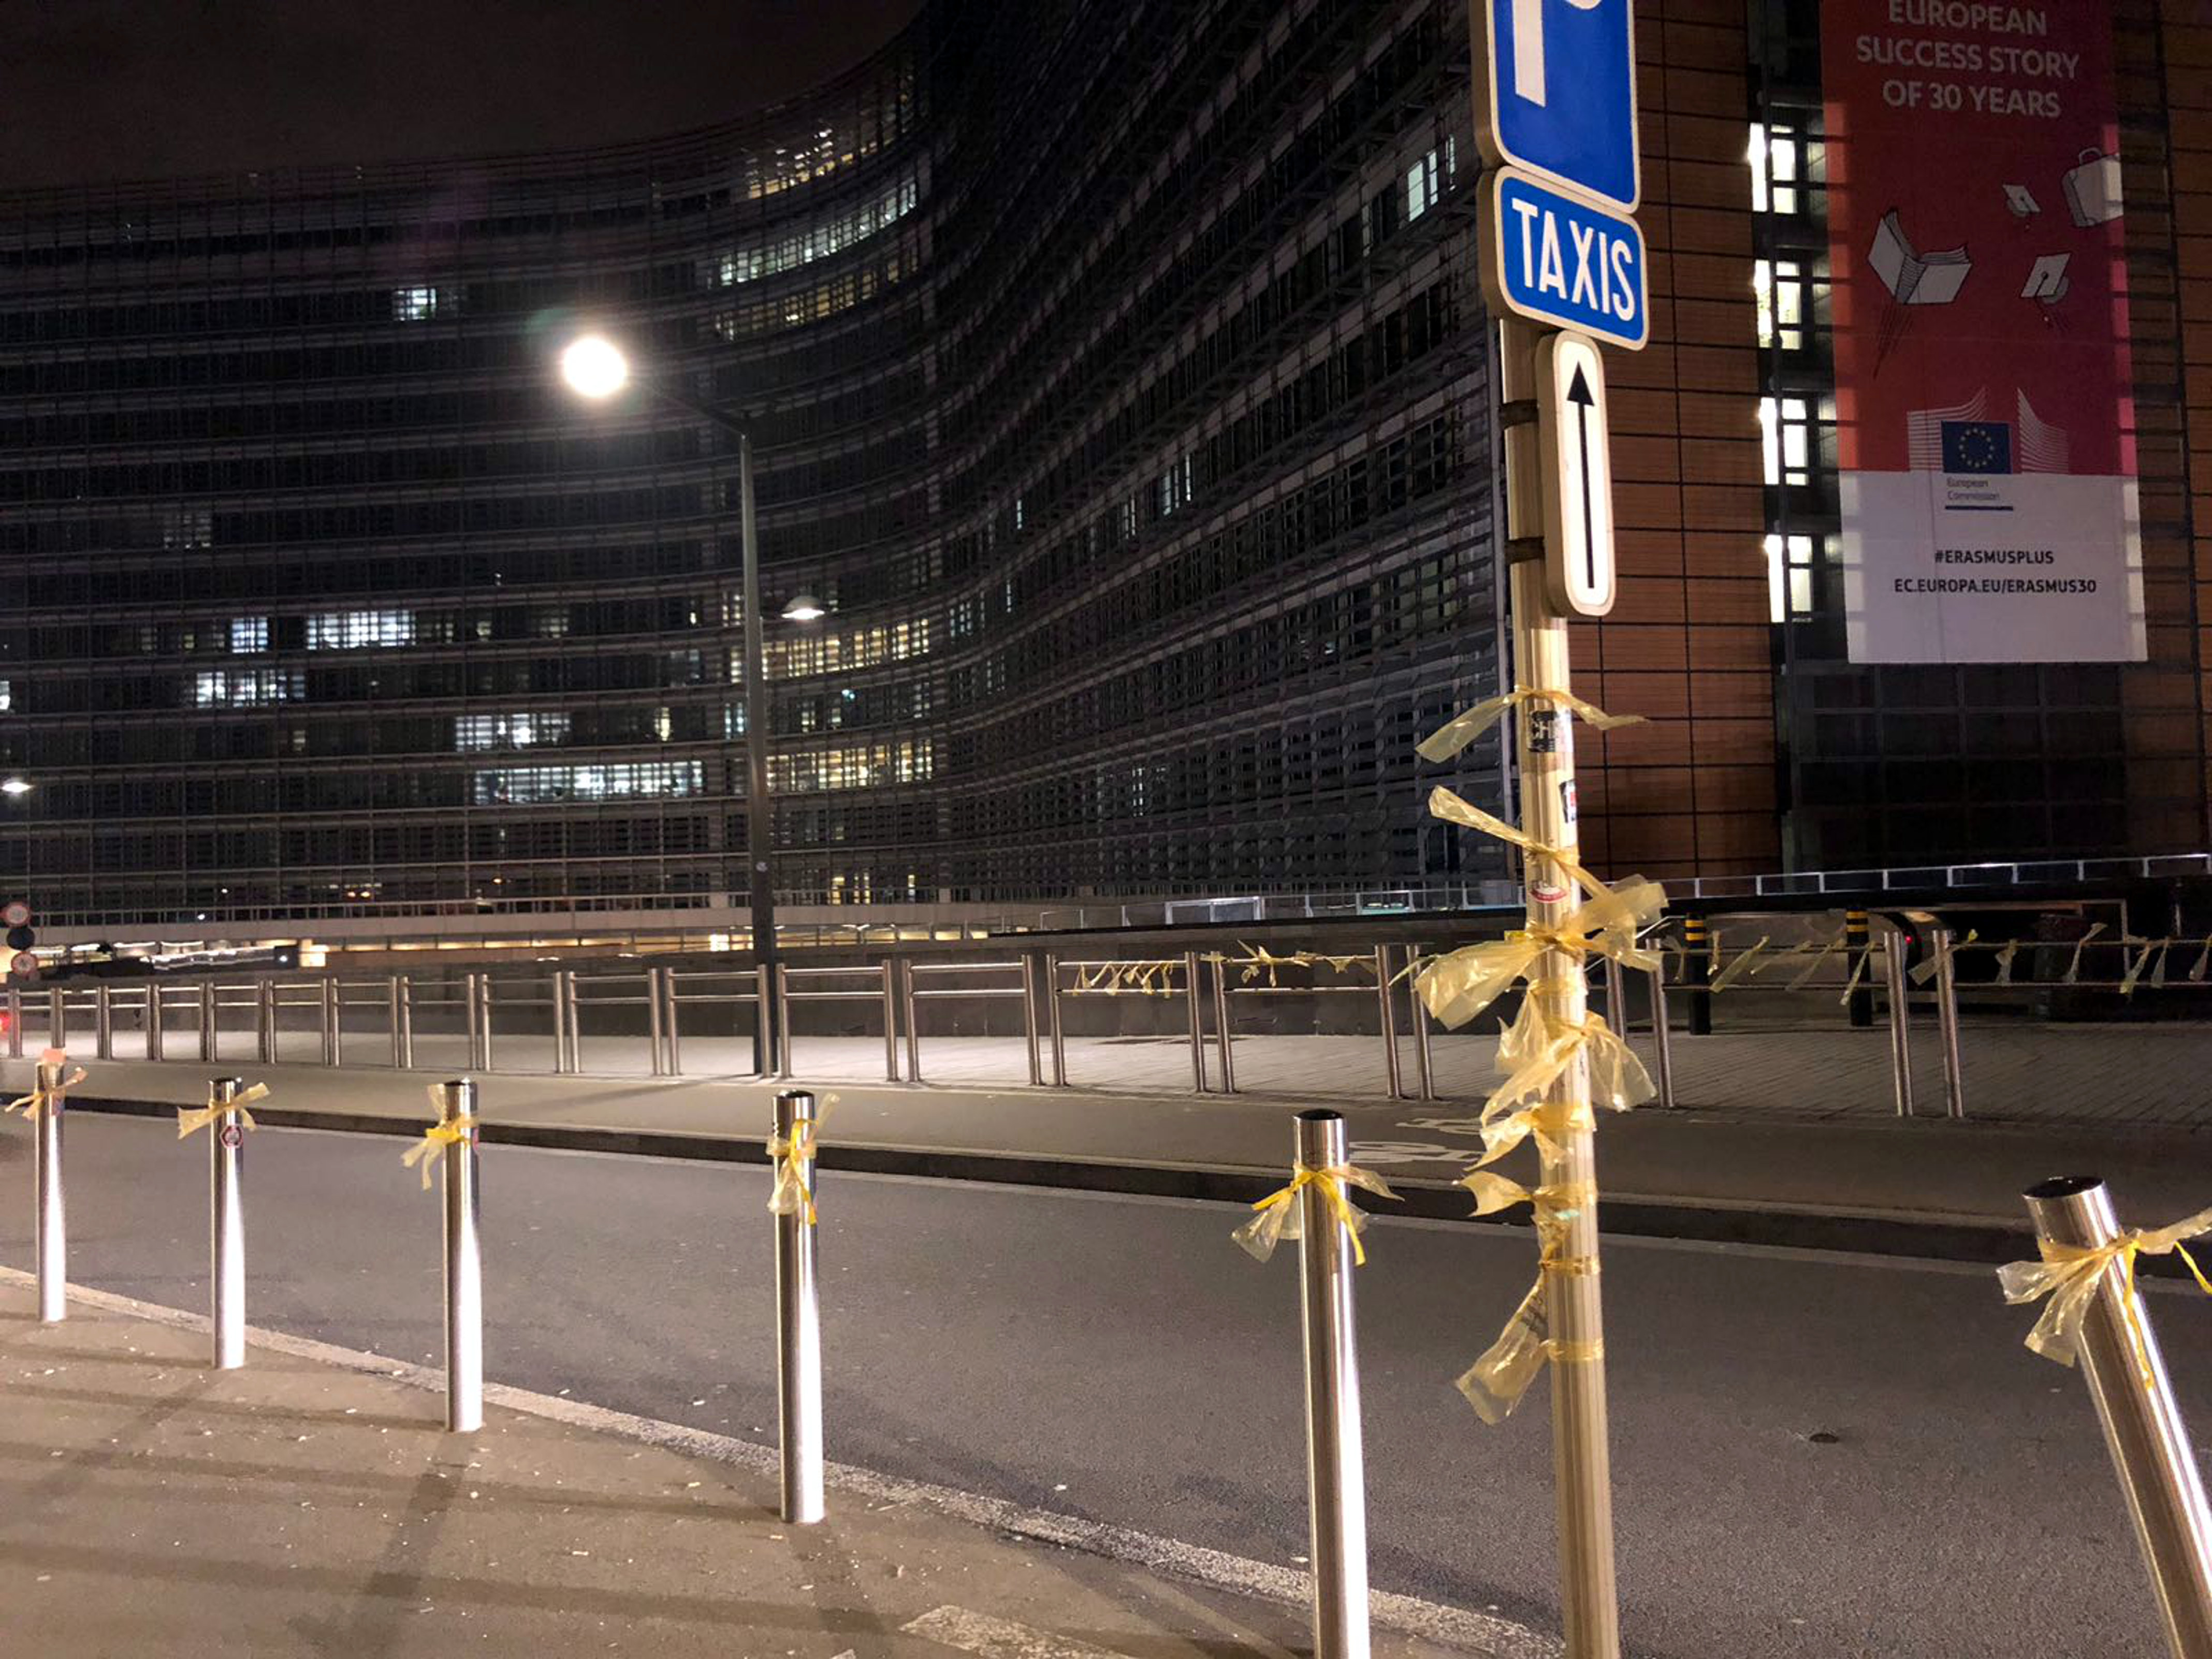 Yellow ribbons tied to the structures around the European Commission by the Brussels CDR on January 14 2018 (by CDR Brussels)